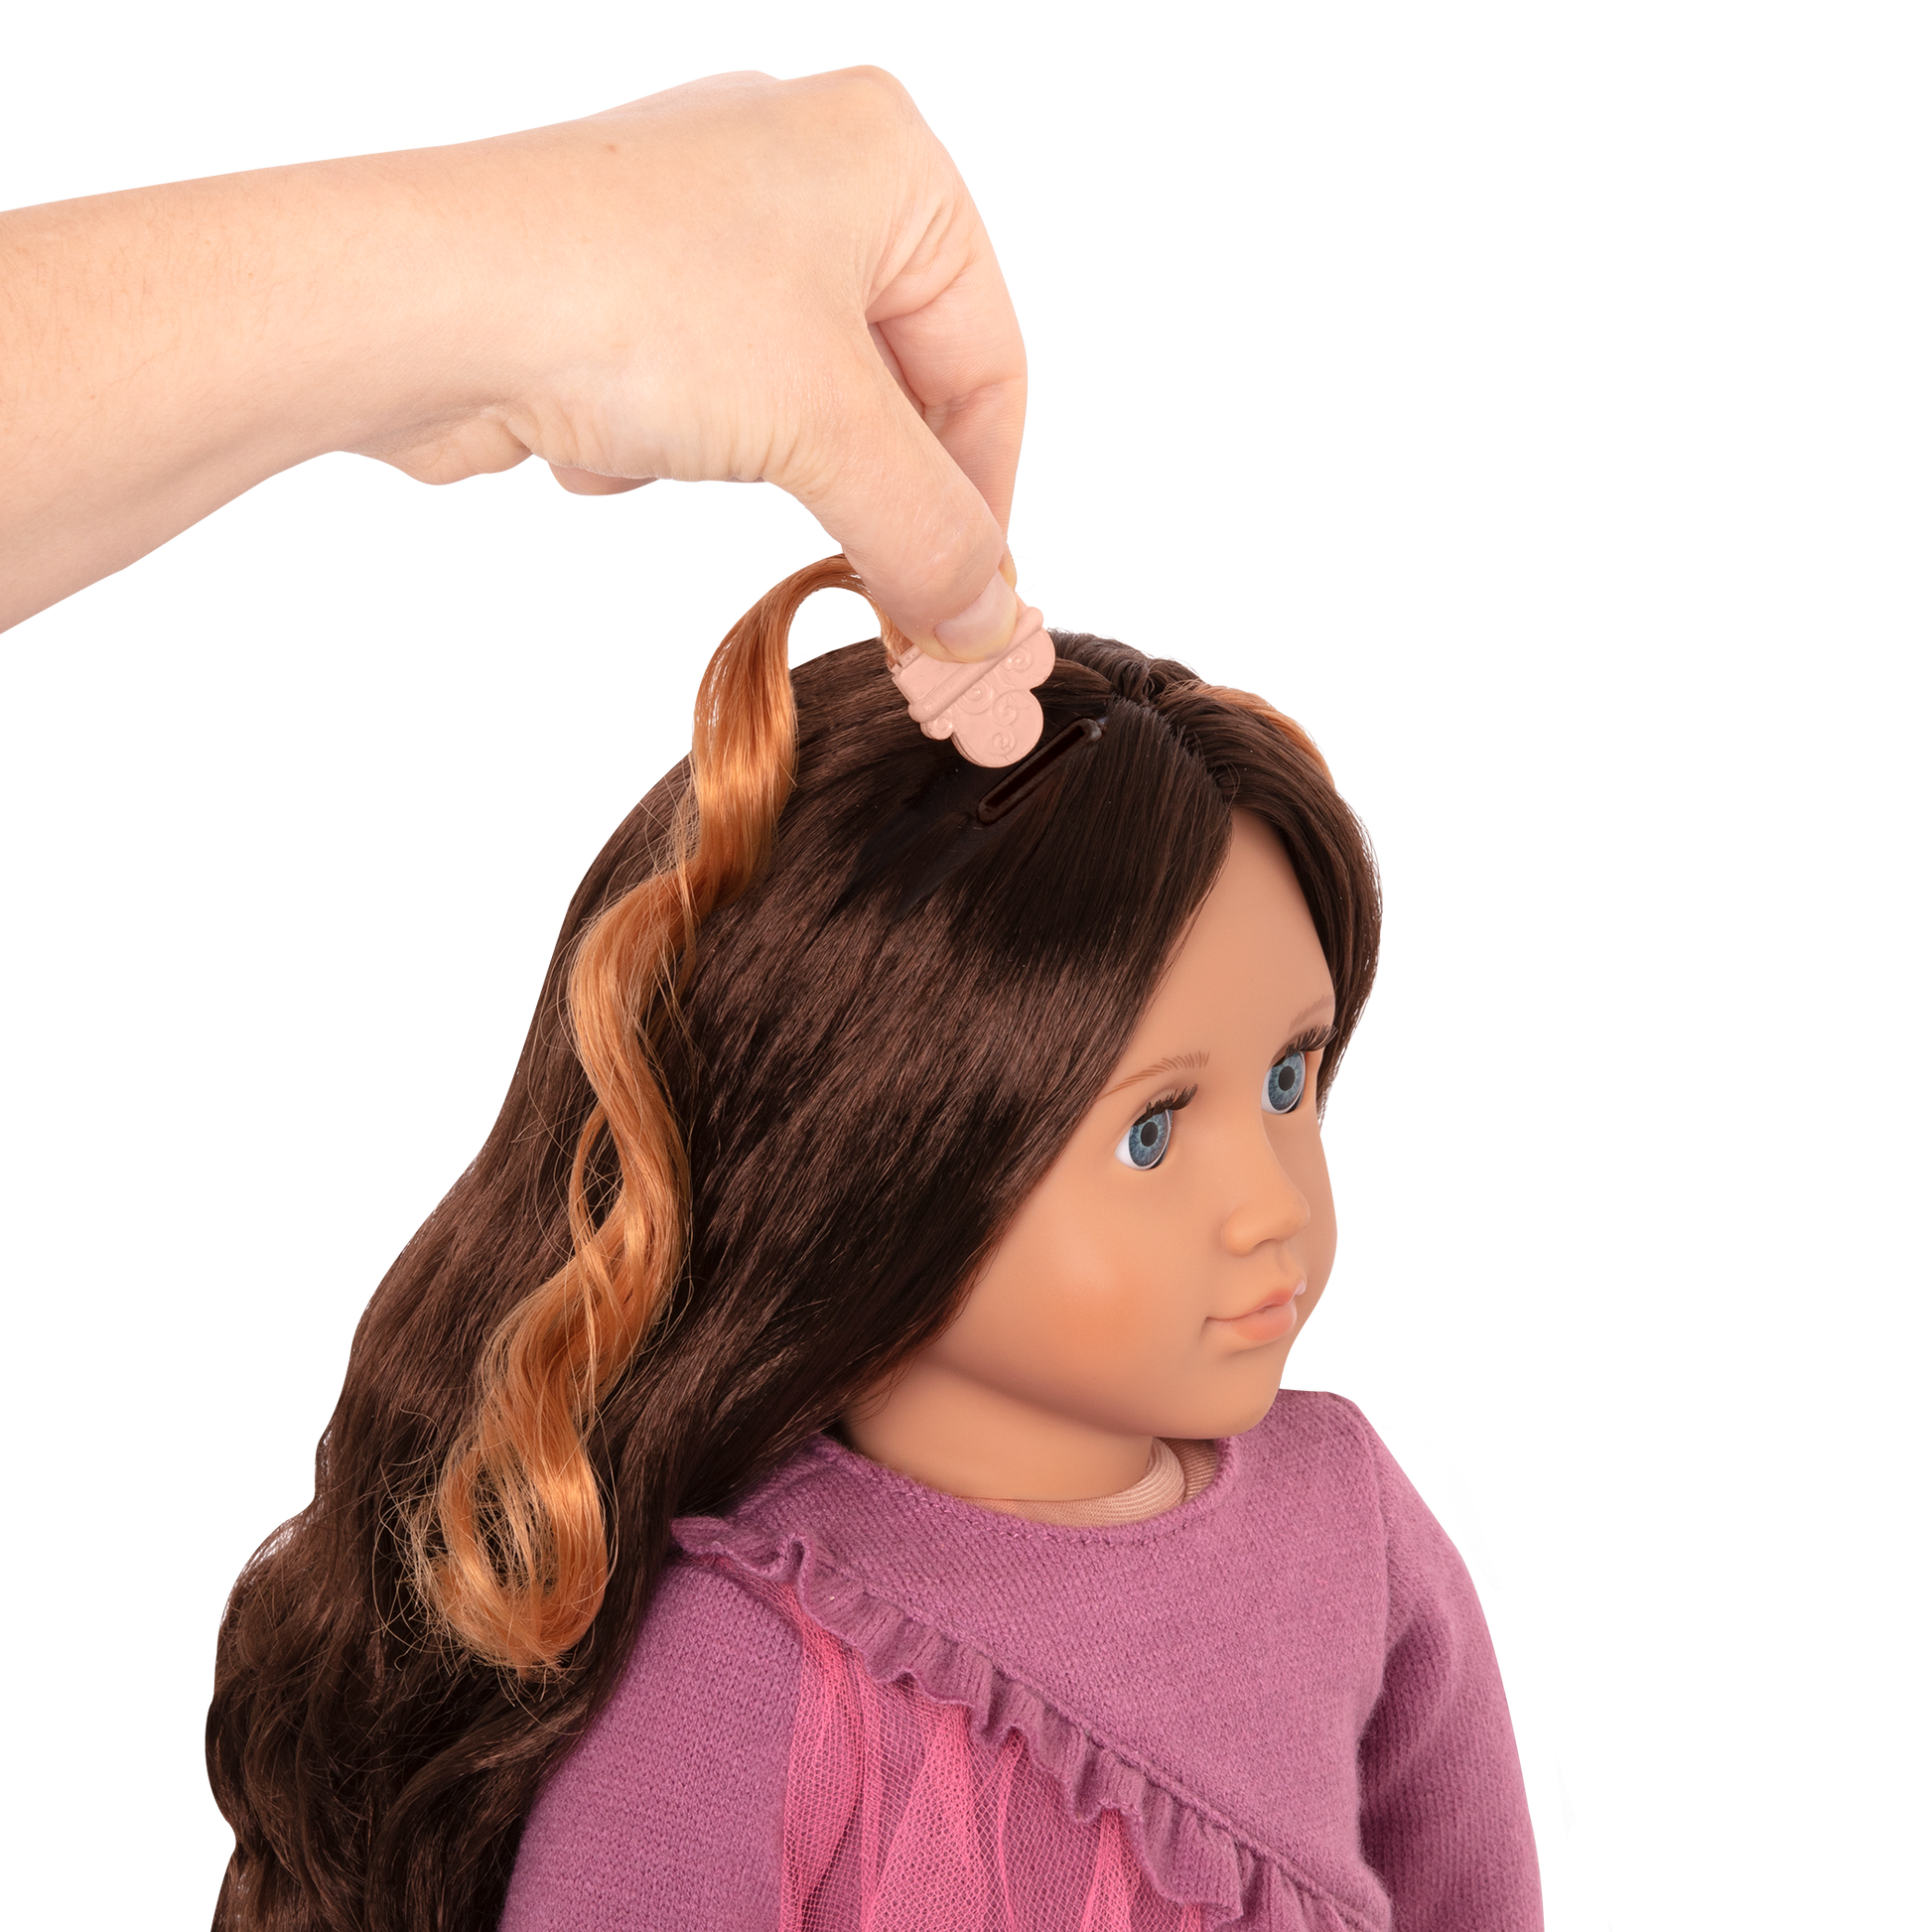 Our Generation, Kaelyn From Hair To There, 18-inch Hair Play Doll